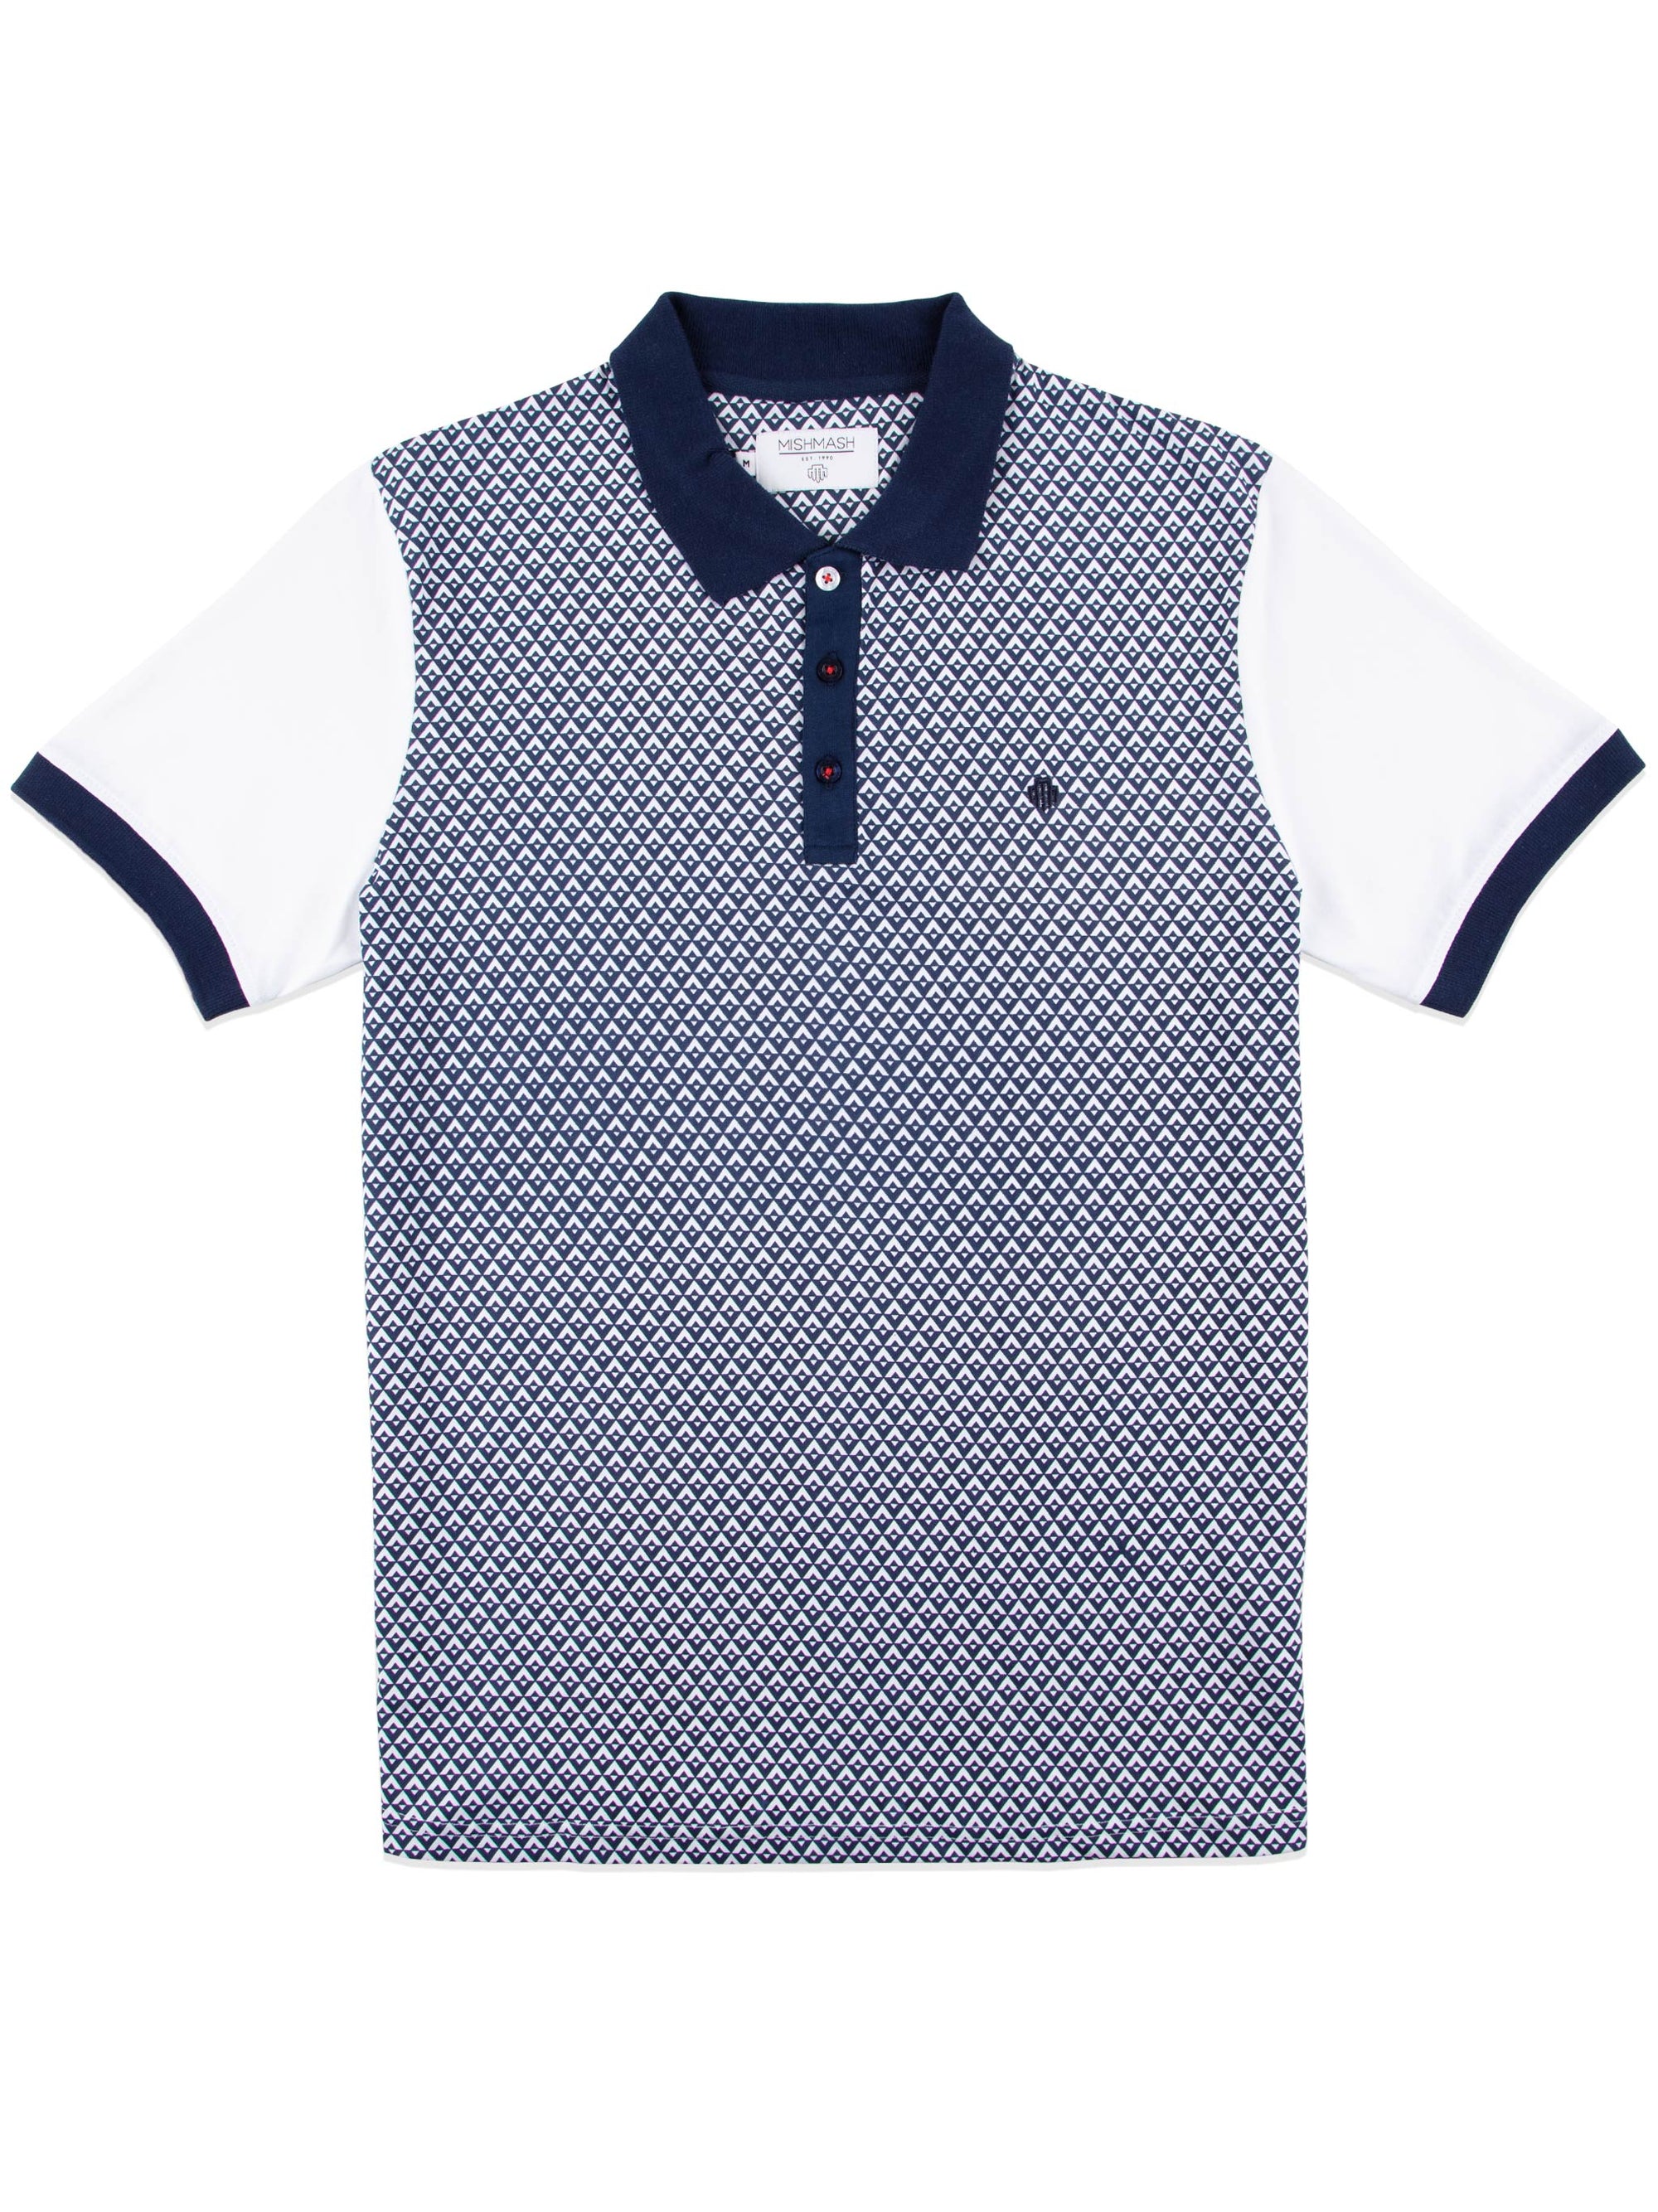 Regular Fit Sirus White Printed Jersey Polo